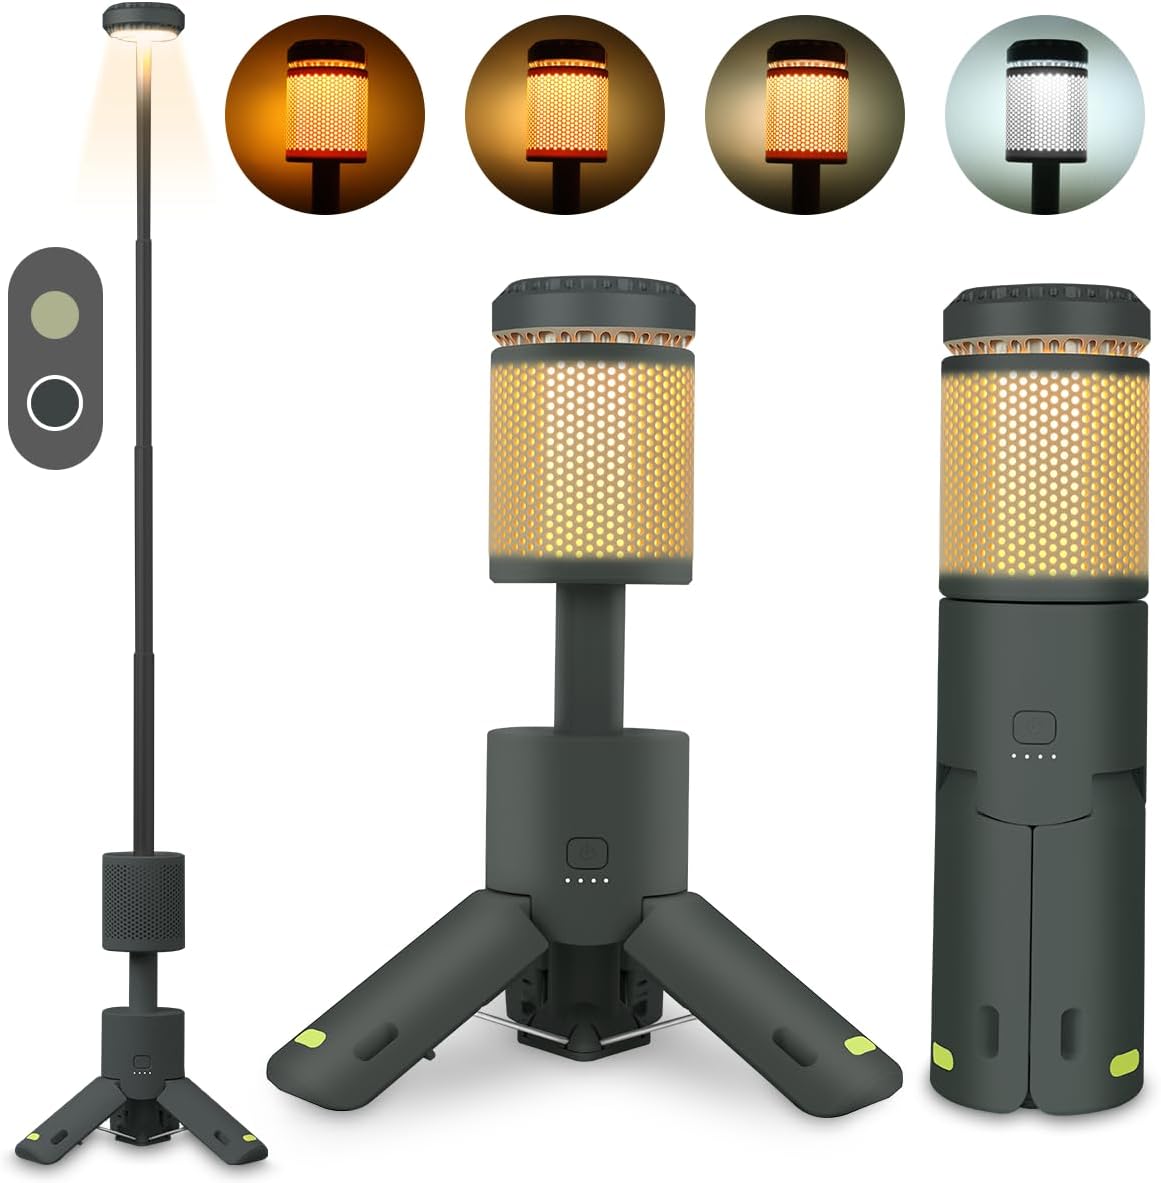 Ultimate Camping Lantern: Portable, Bright, and Long-Lasting with Rechargeable Battery